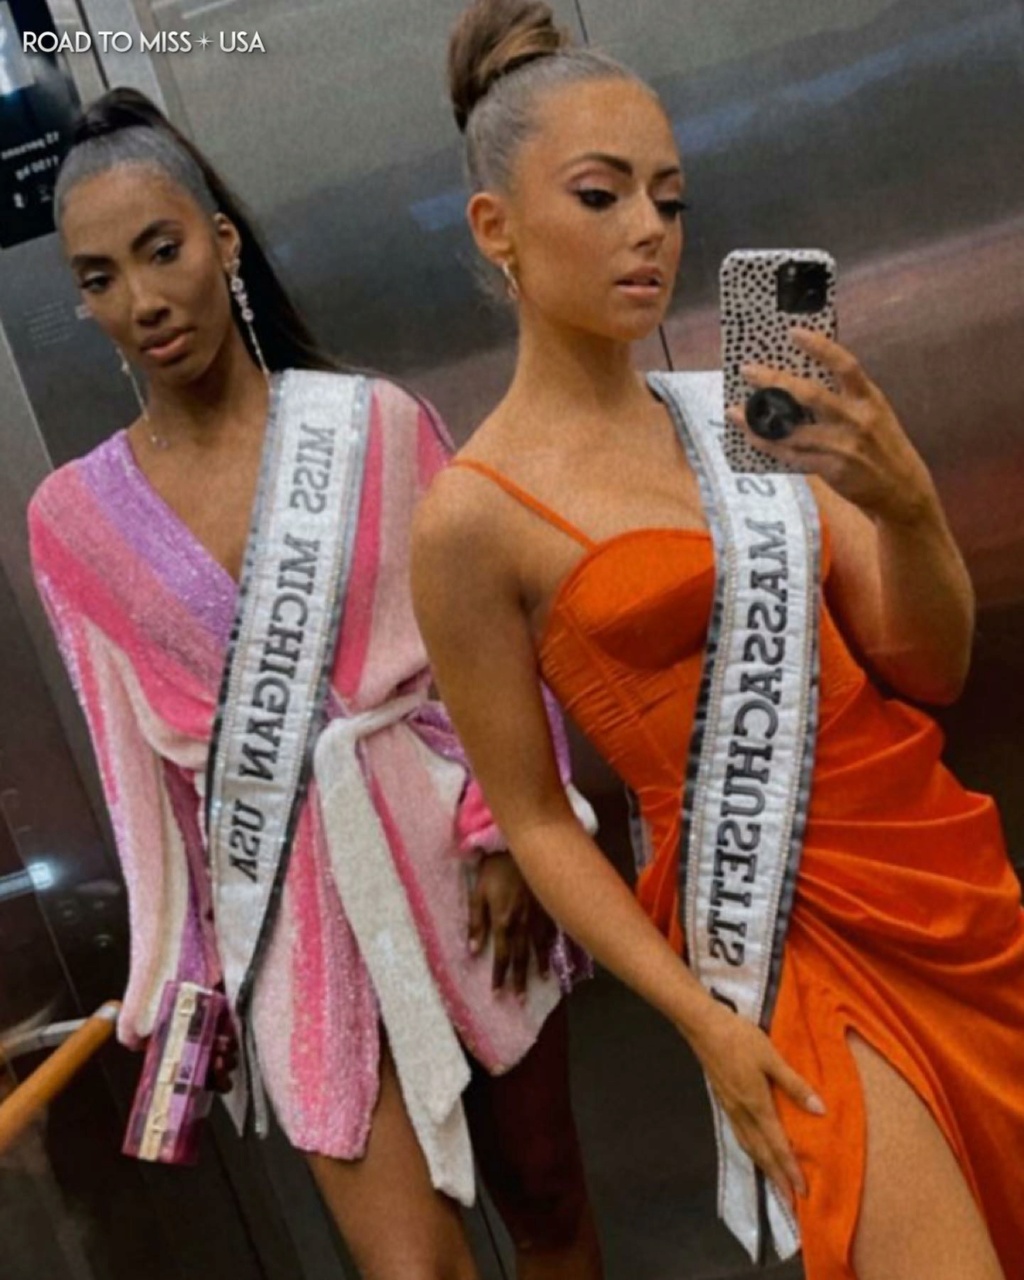 ROAD TO MISS USA 2021 is KENTUCKY! - Page 3 24218013